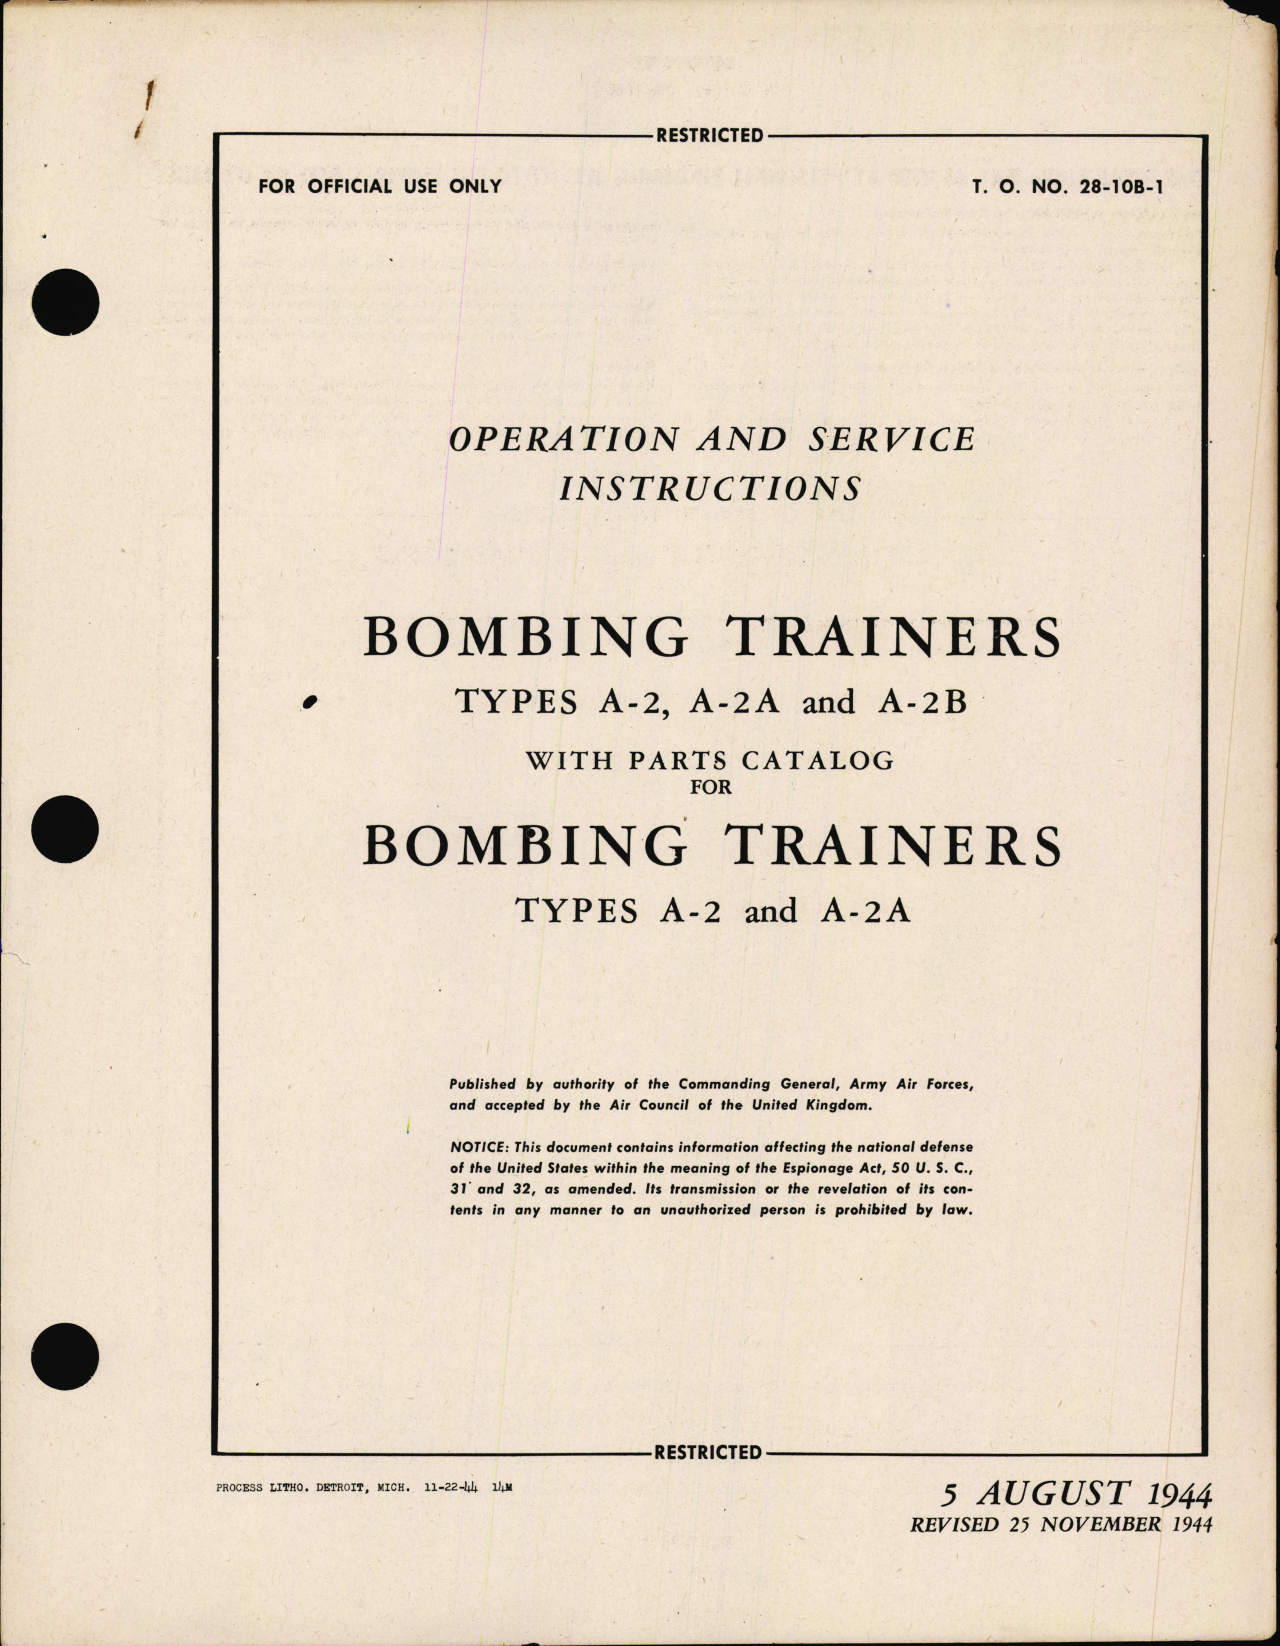 Sample page 1 from AirCorps Library document: Operation and Service Instructions with Parts Catalog for Bombing Trainers 